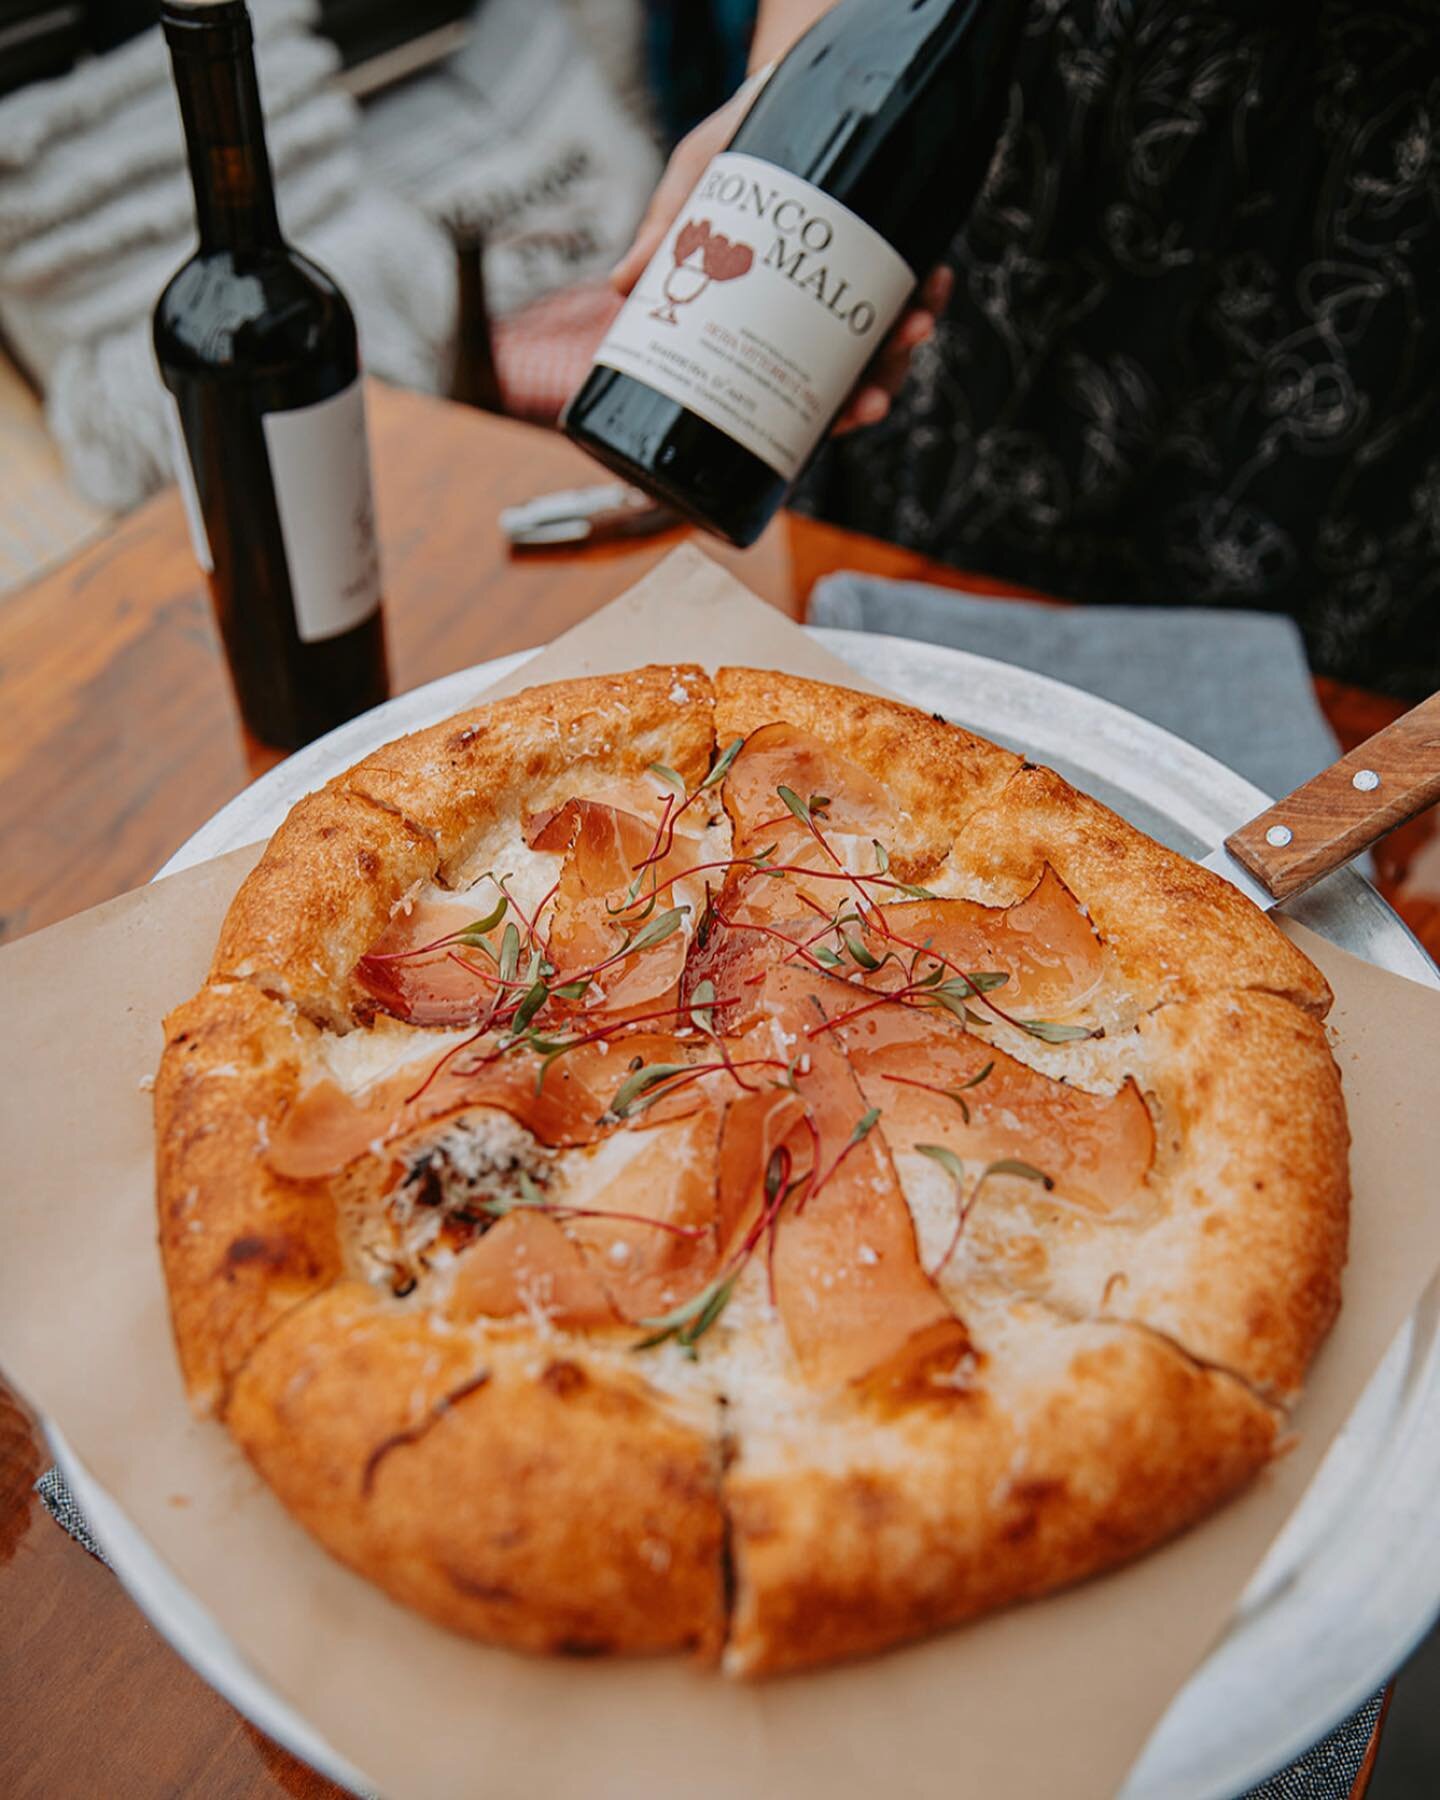 The simplicity of Italian food is what sets it apart. The quality of ingredients is what keeps us going back. A light cream sauce, leeks, Grana Padano and thinly sliced Prosciutto on top of our home made dough. And the dough has only four ingredients